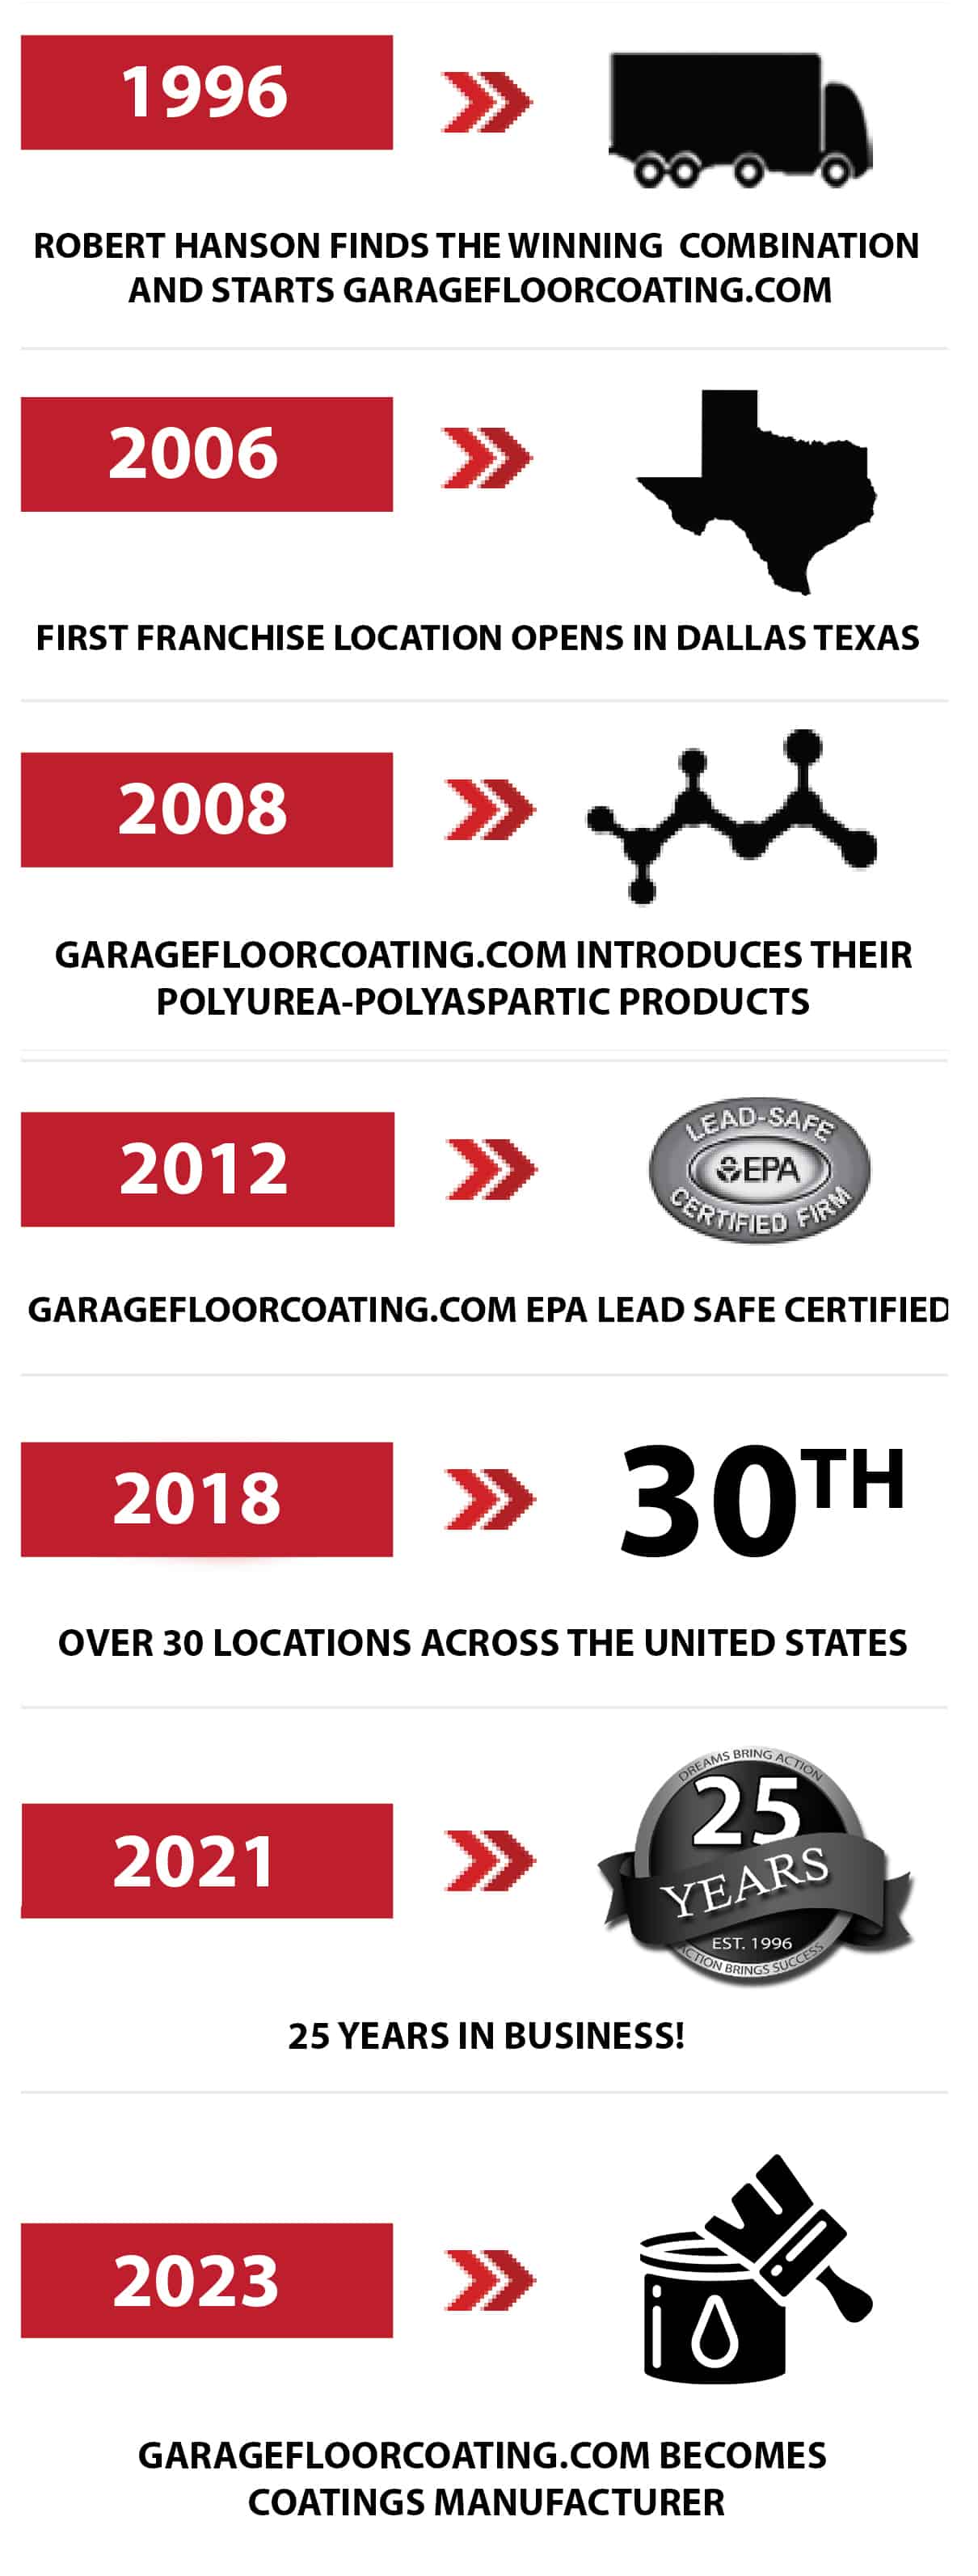 Figure shows growth of GarageFloorCoating.com over 25-year history of epoxy floor coatings development and installation